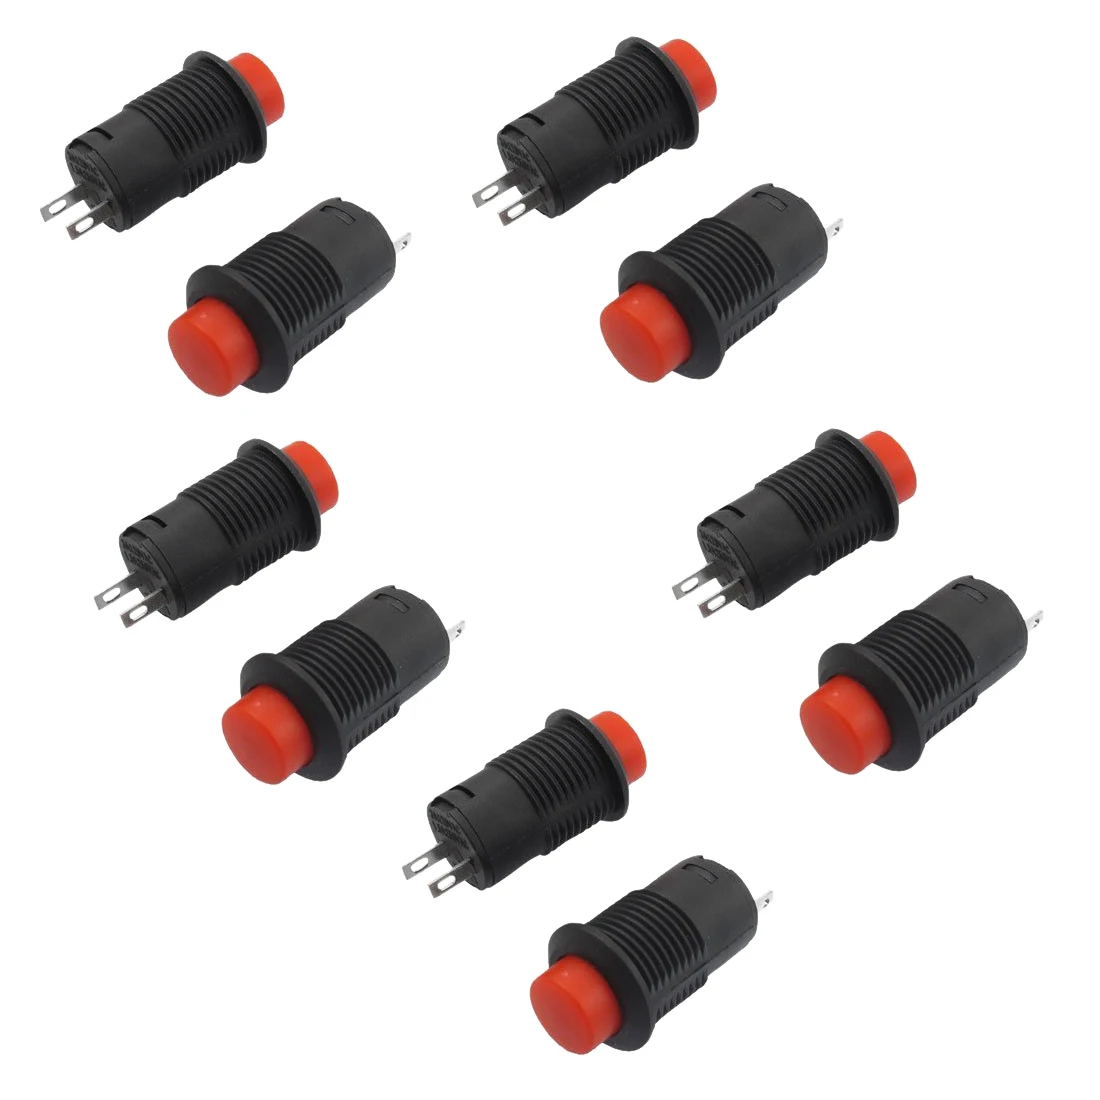 10 x New Momentary SPST NO Red Round Cap Push Button Switch AC 3A/250V 